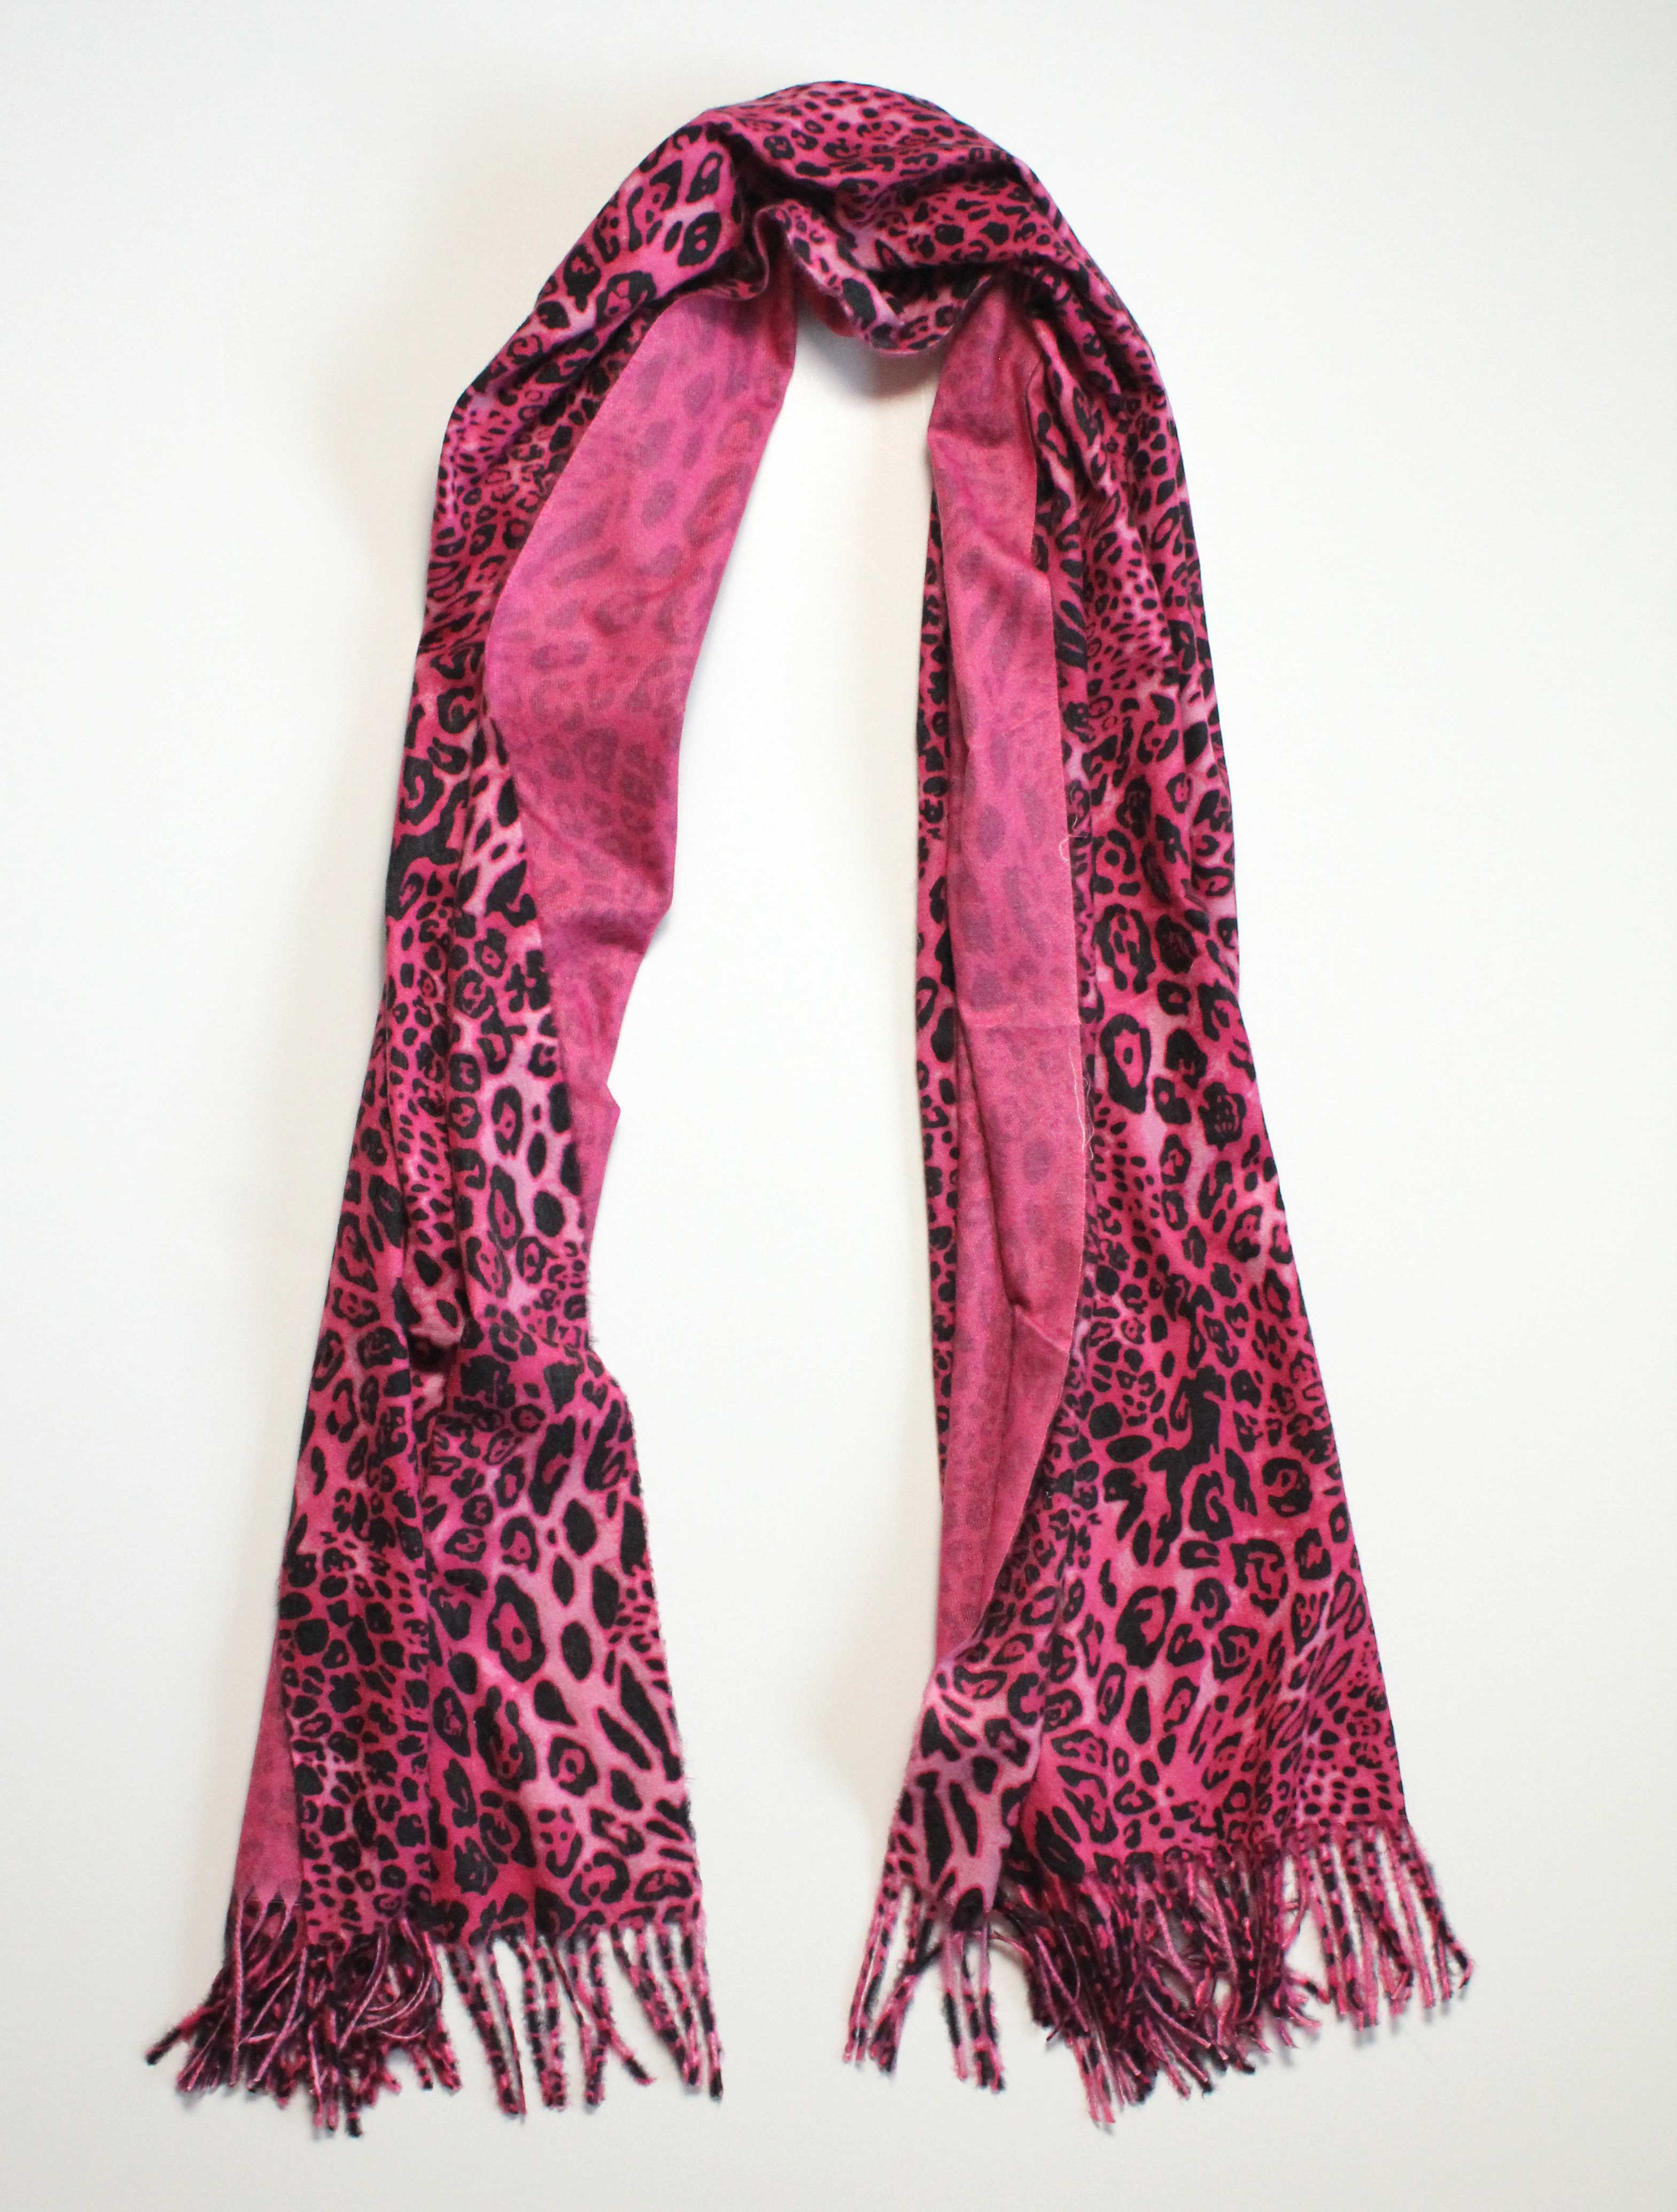 Leopard Print in Pastel Pink, Hot Pink and Fuchsia Scarf